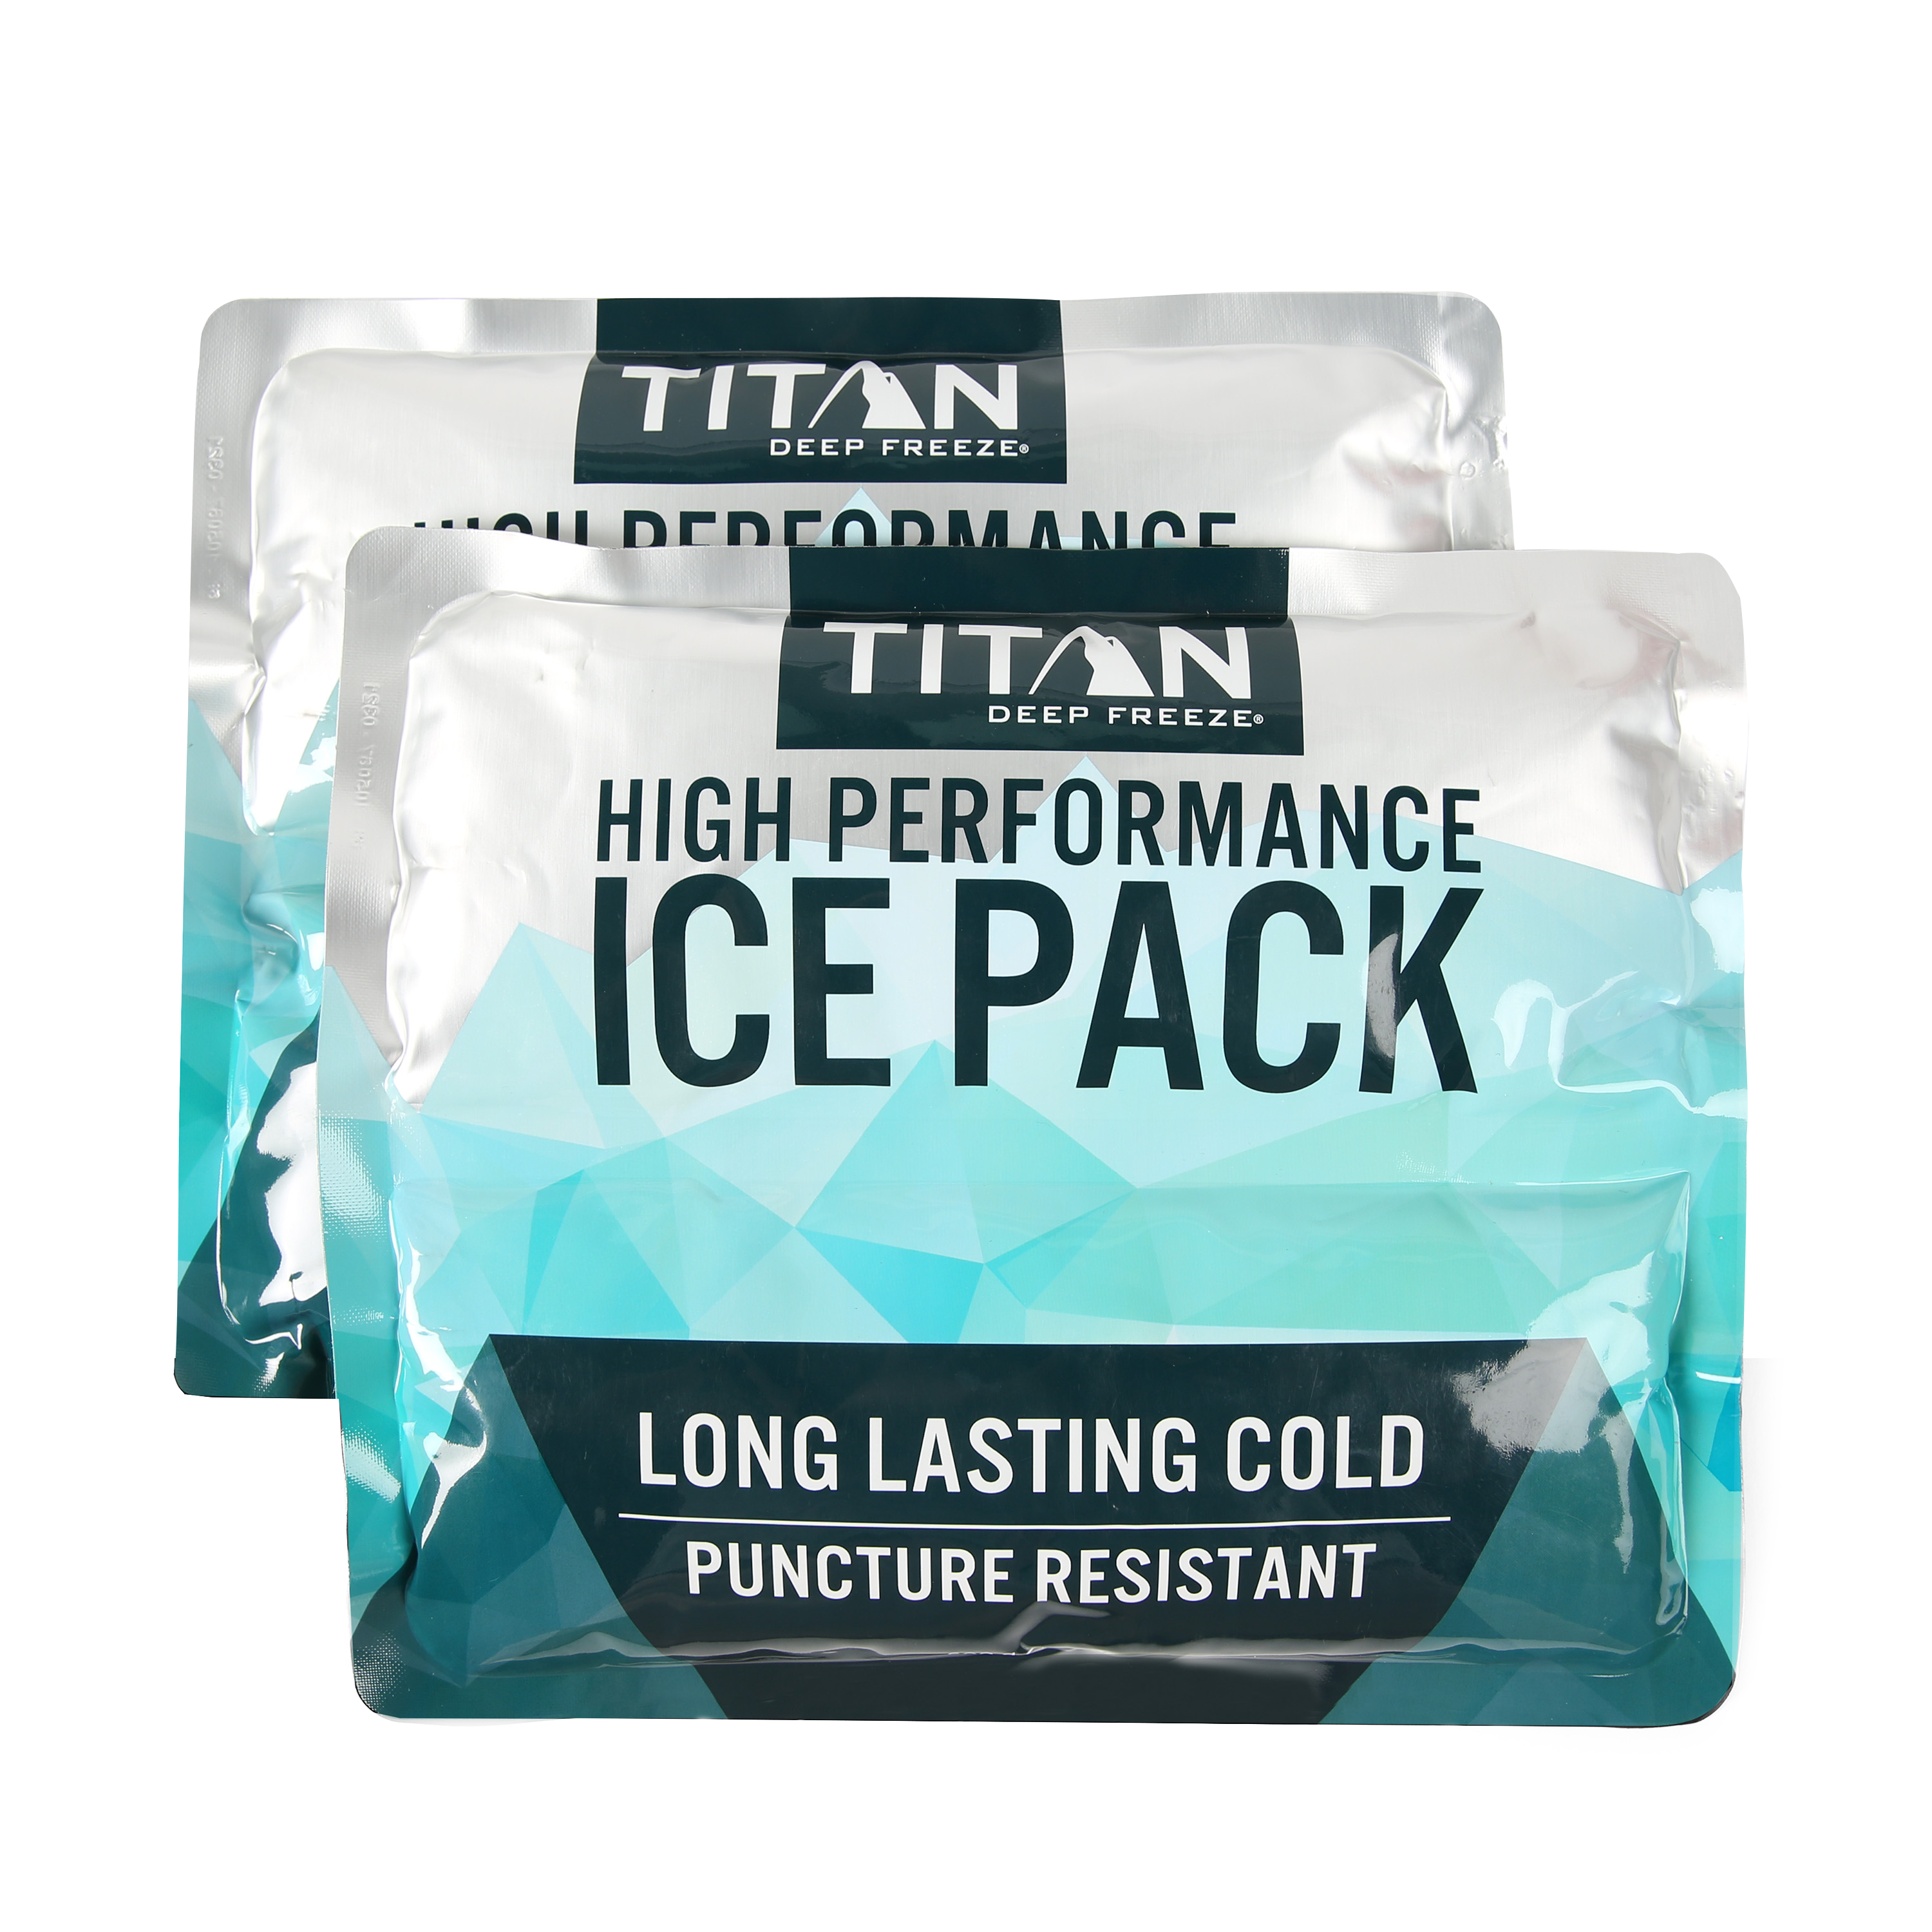 Arctic Zone Titan Deep Freeze High Performance Ice Pack for Lunch Box or Cooler, Set of 2 - 600 Grams Each